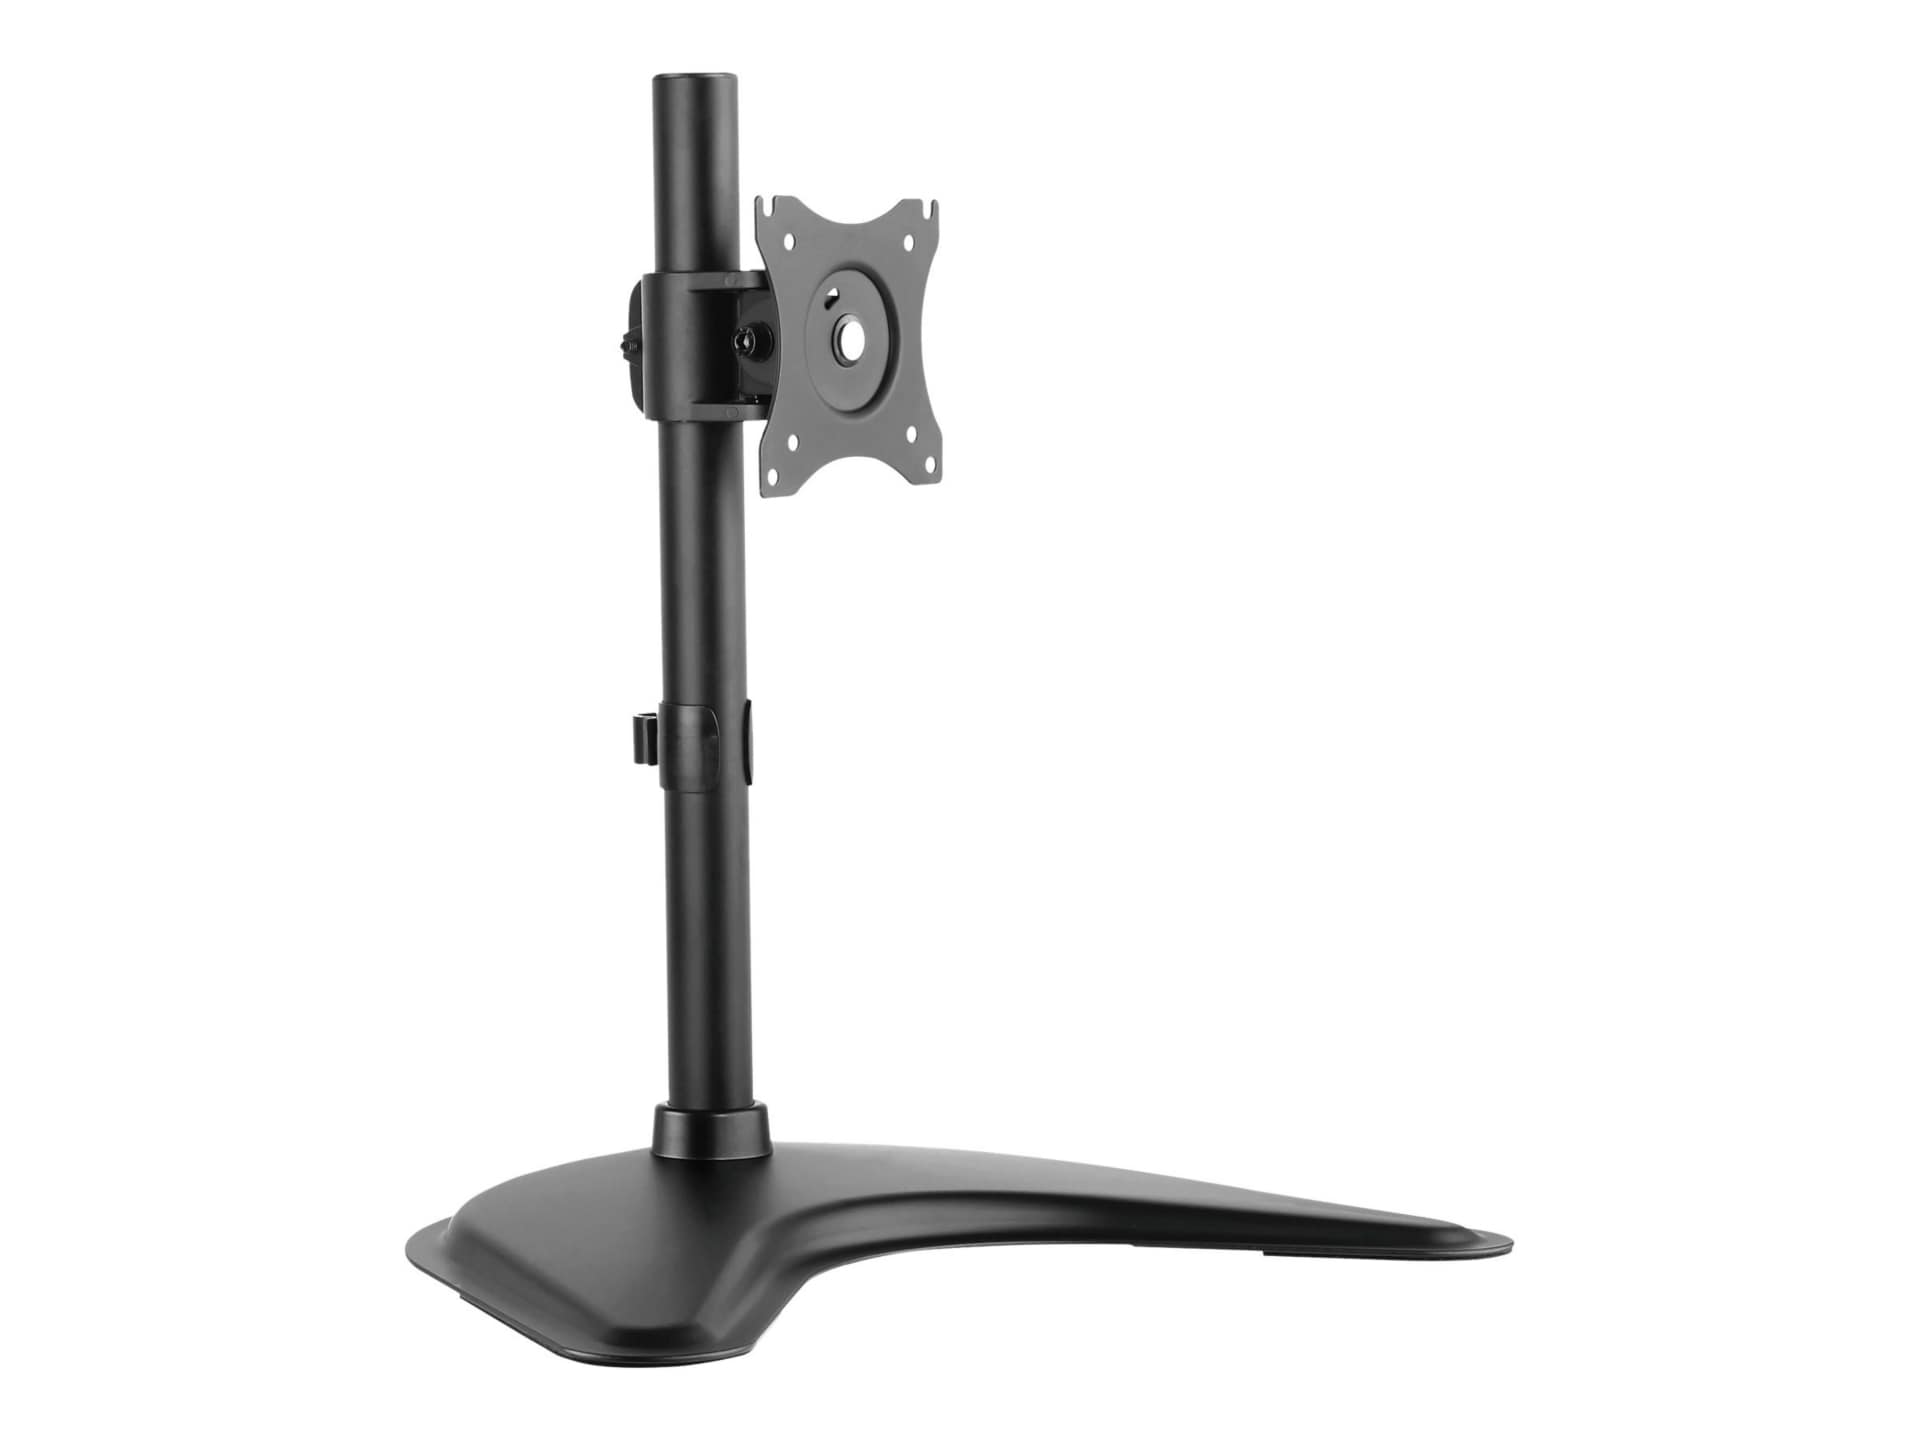 Tripp Lite TV Desk Mount Monitor Stand Single-Display Swivel Tilt for 13" to 27" Displays stand - full-motion - for